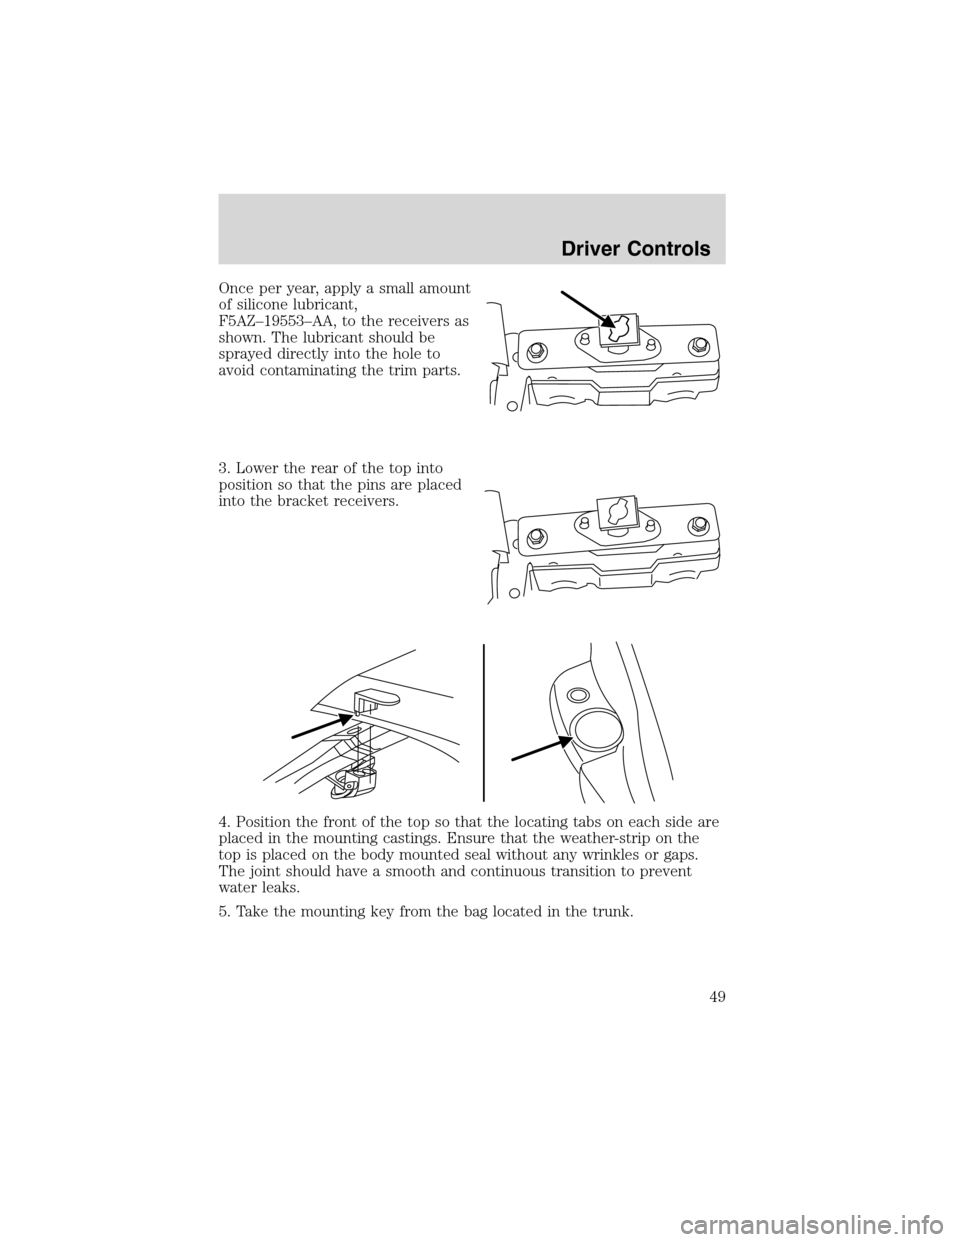 FORD THUNDERBIRD 2003 11.G Service Manual Once per year, apply a small amount
of silicone lubricant,
F5AZ–19553–AA, to the receivers as
shown. The lubricant should be
sprayed directly into the hole to
avoid contaminating the trim parts.
3